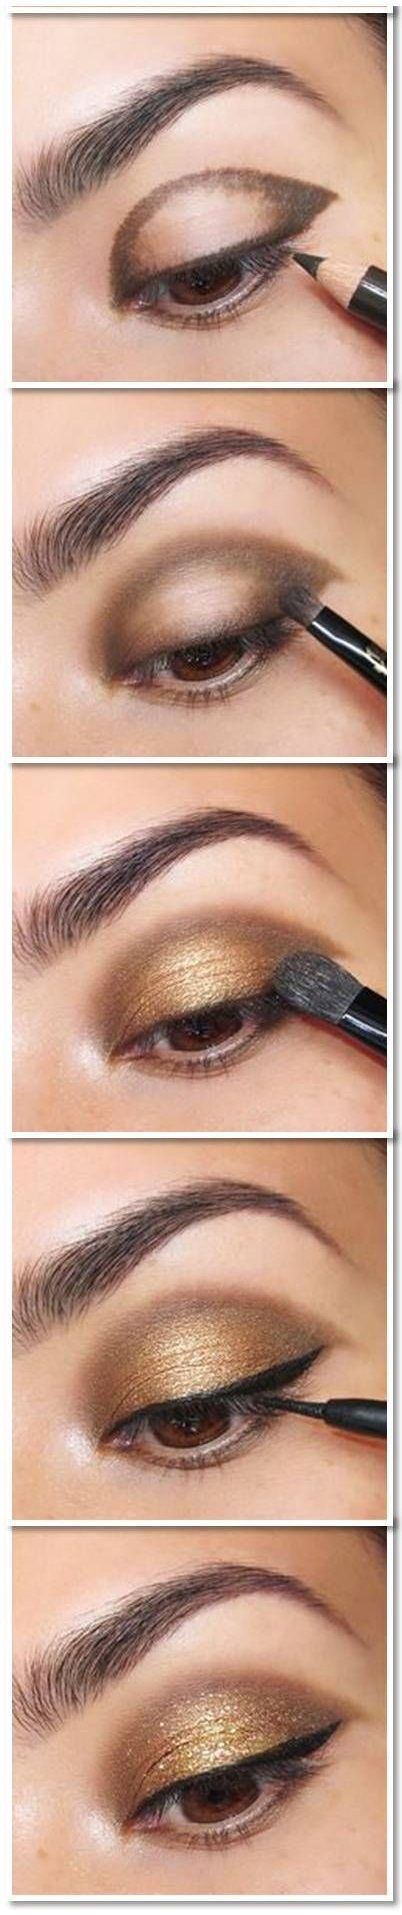 prom-makeup-tutorial-for-beginners-97_15 Prom make-up tutorial voor beginners